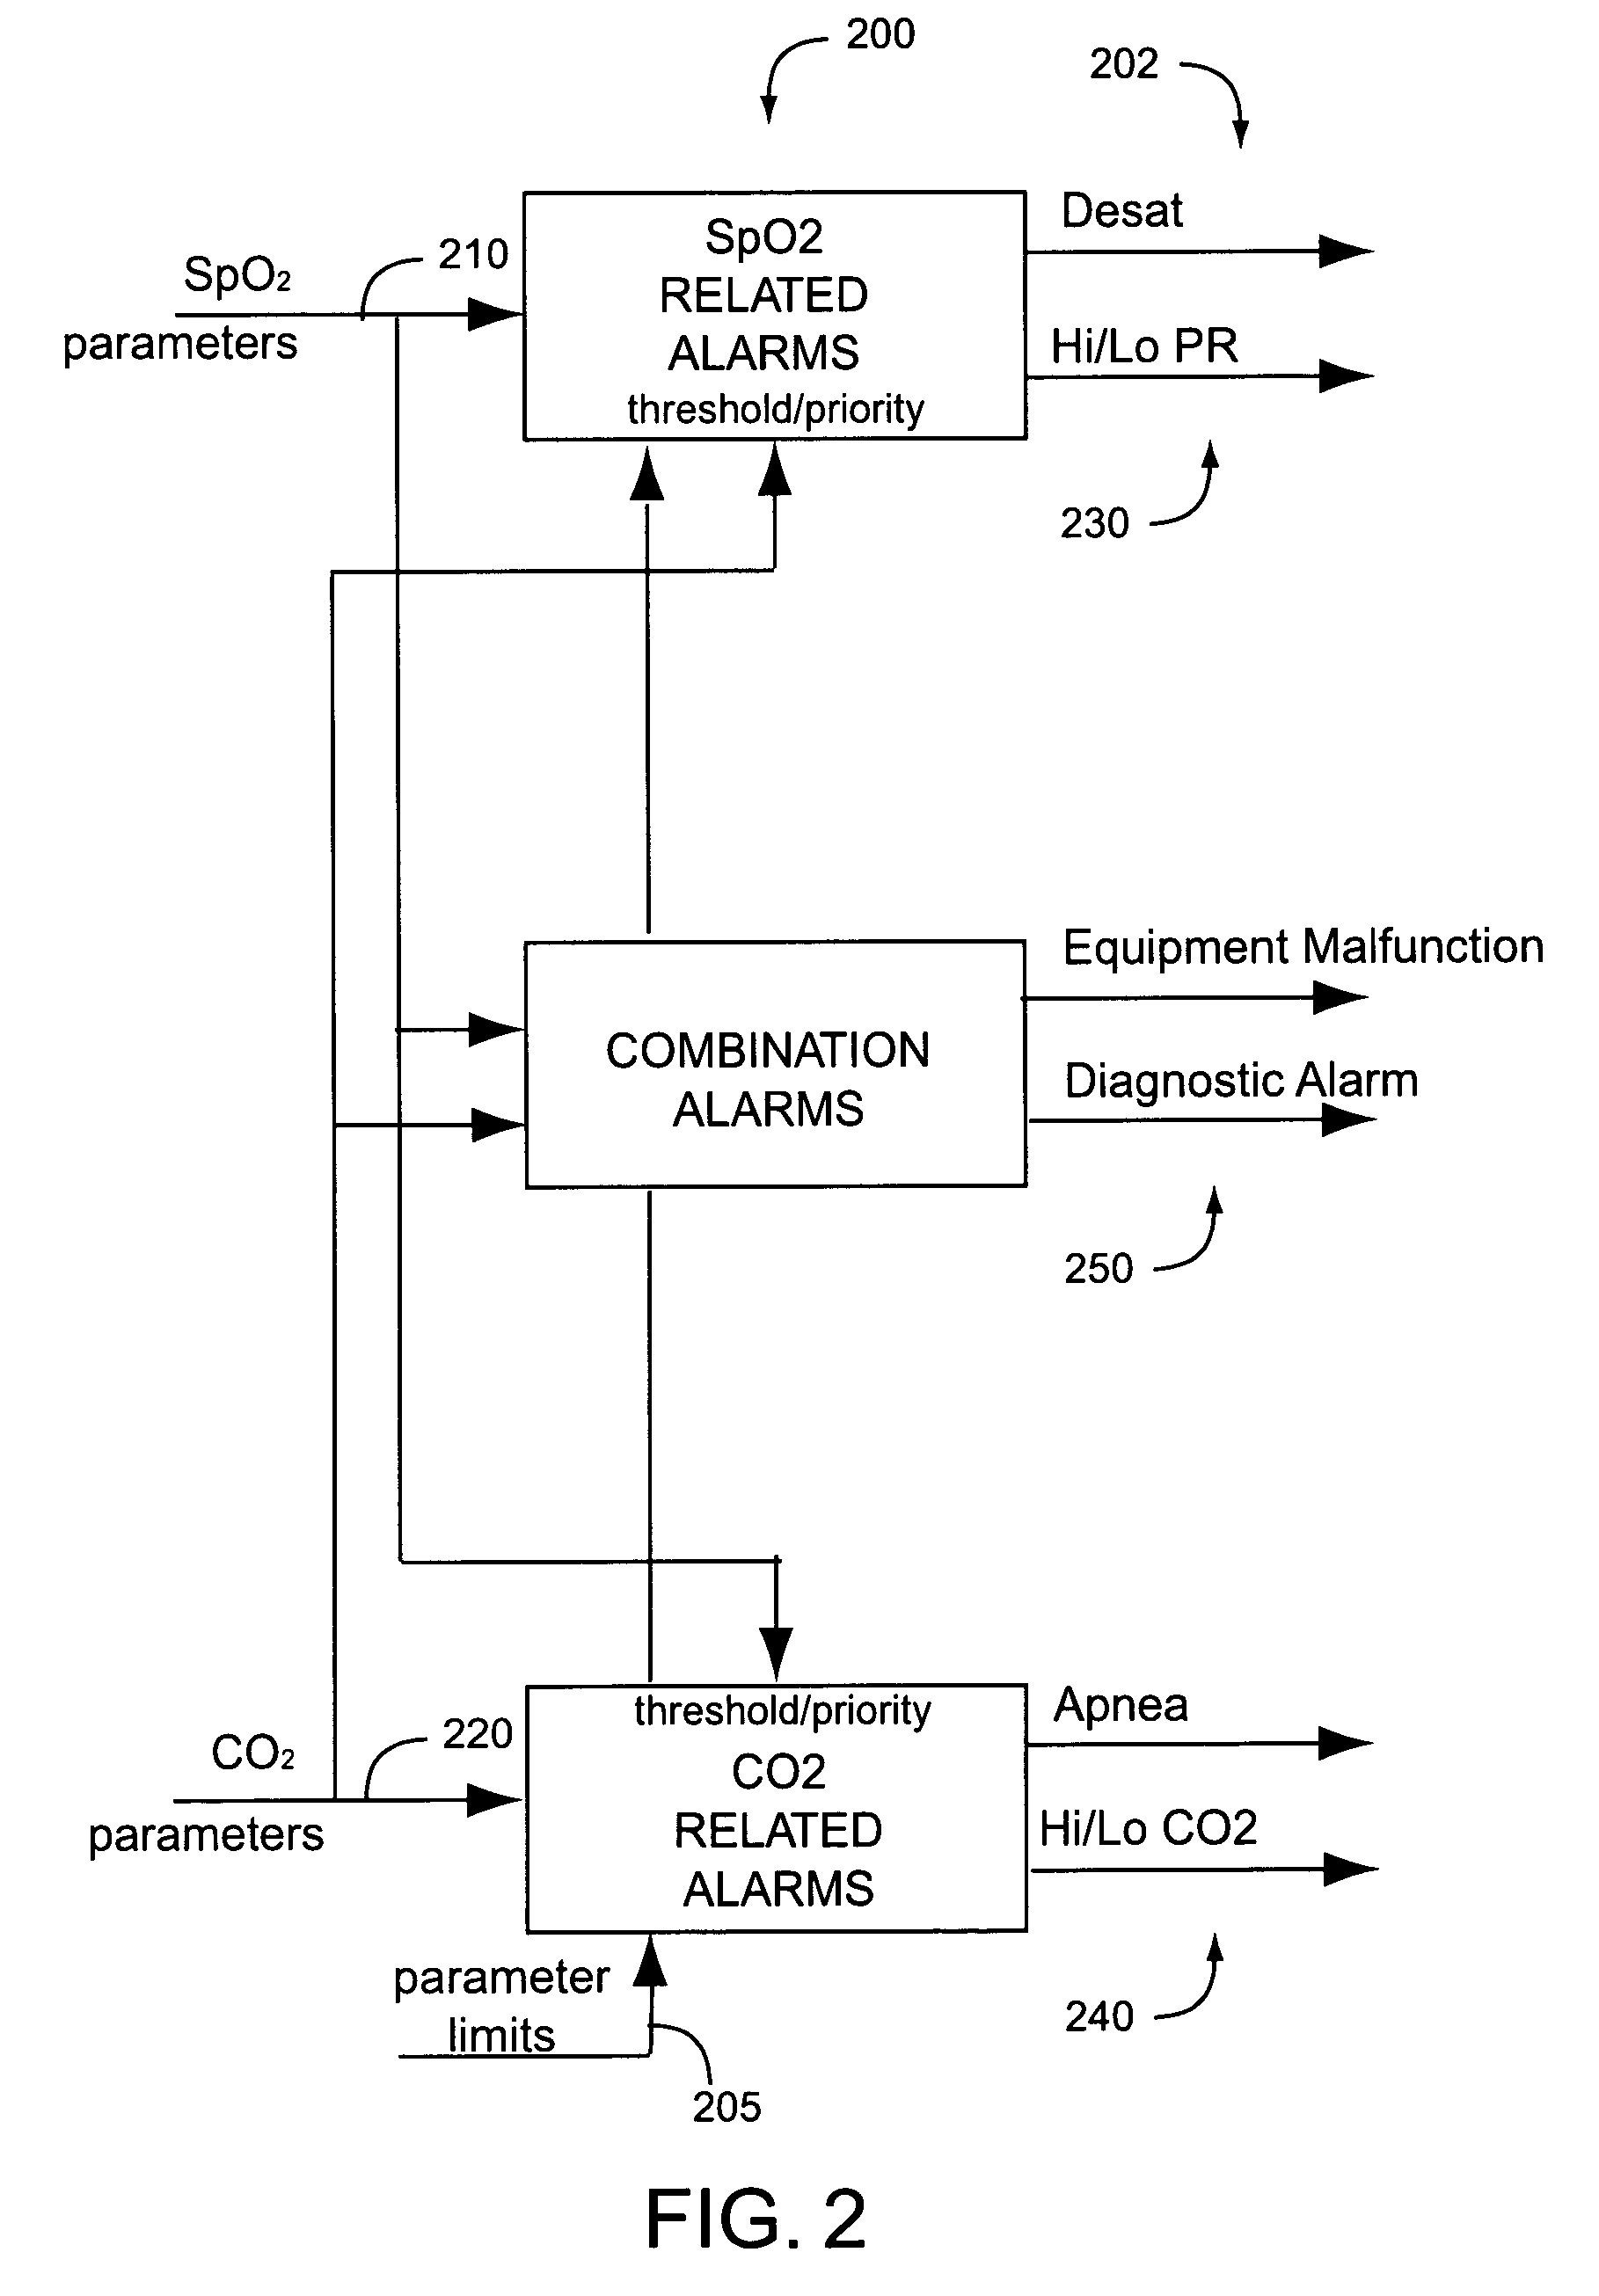 Physiological parameter system